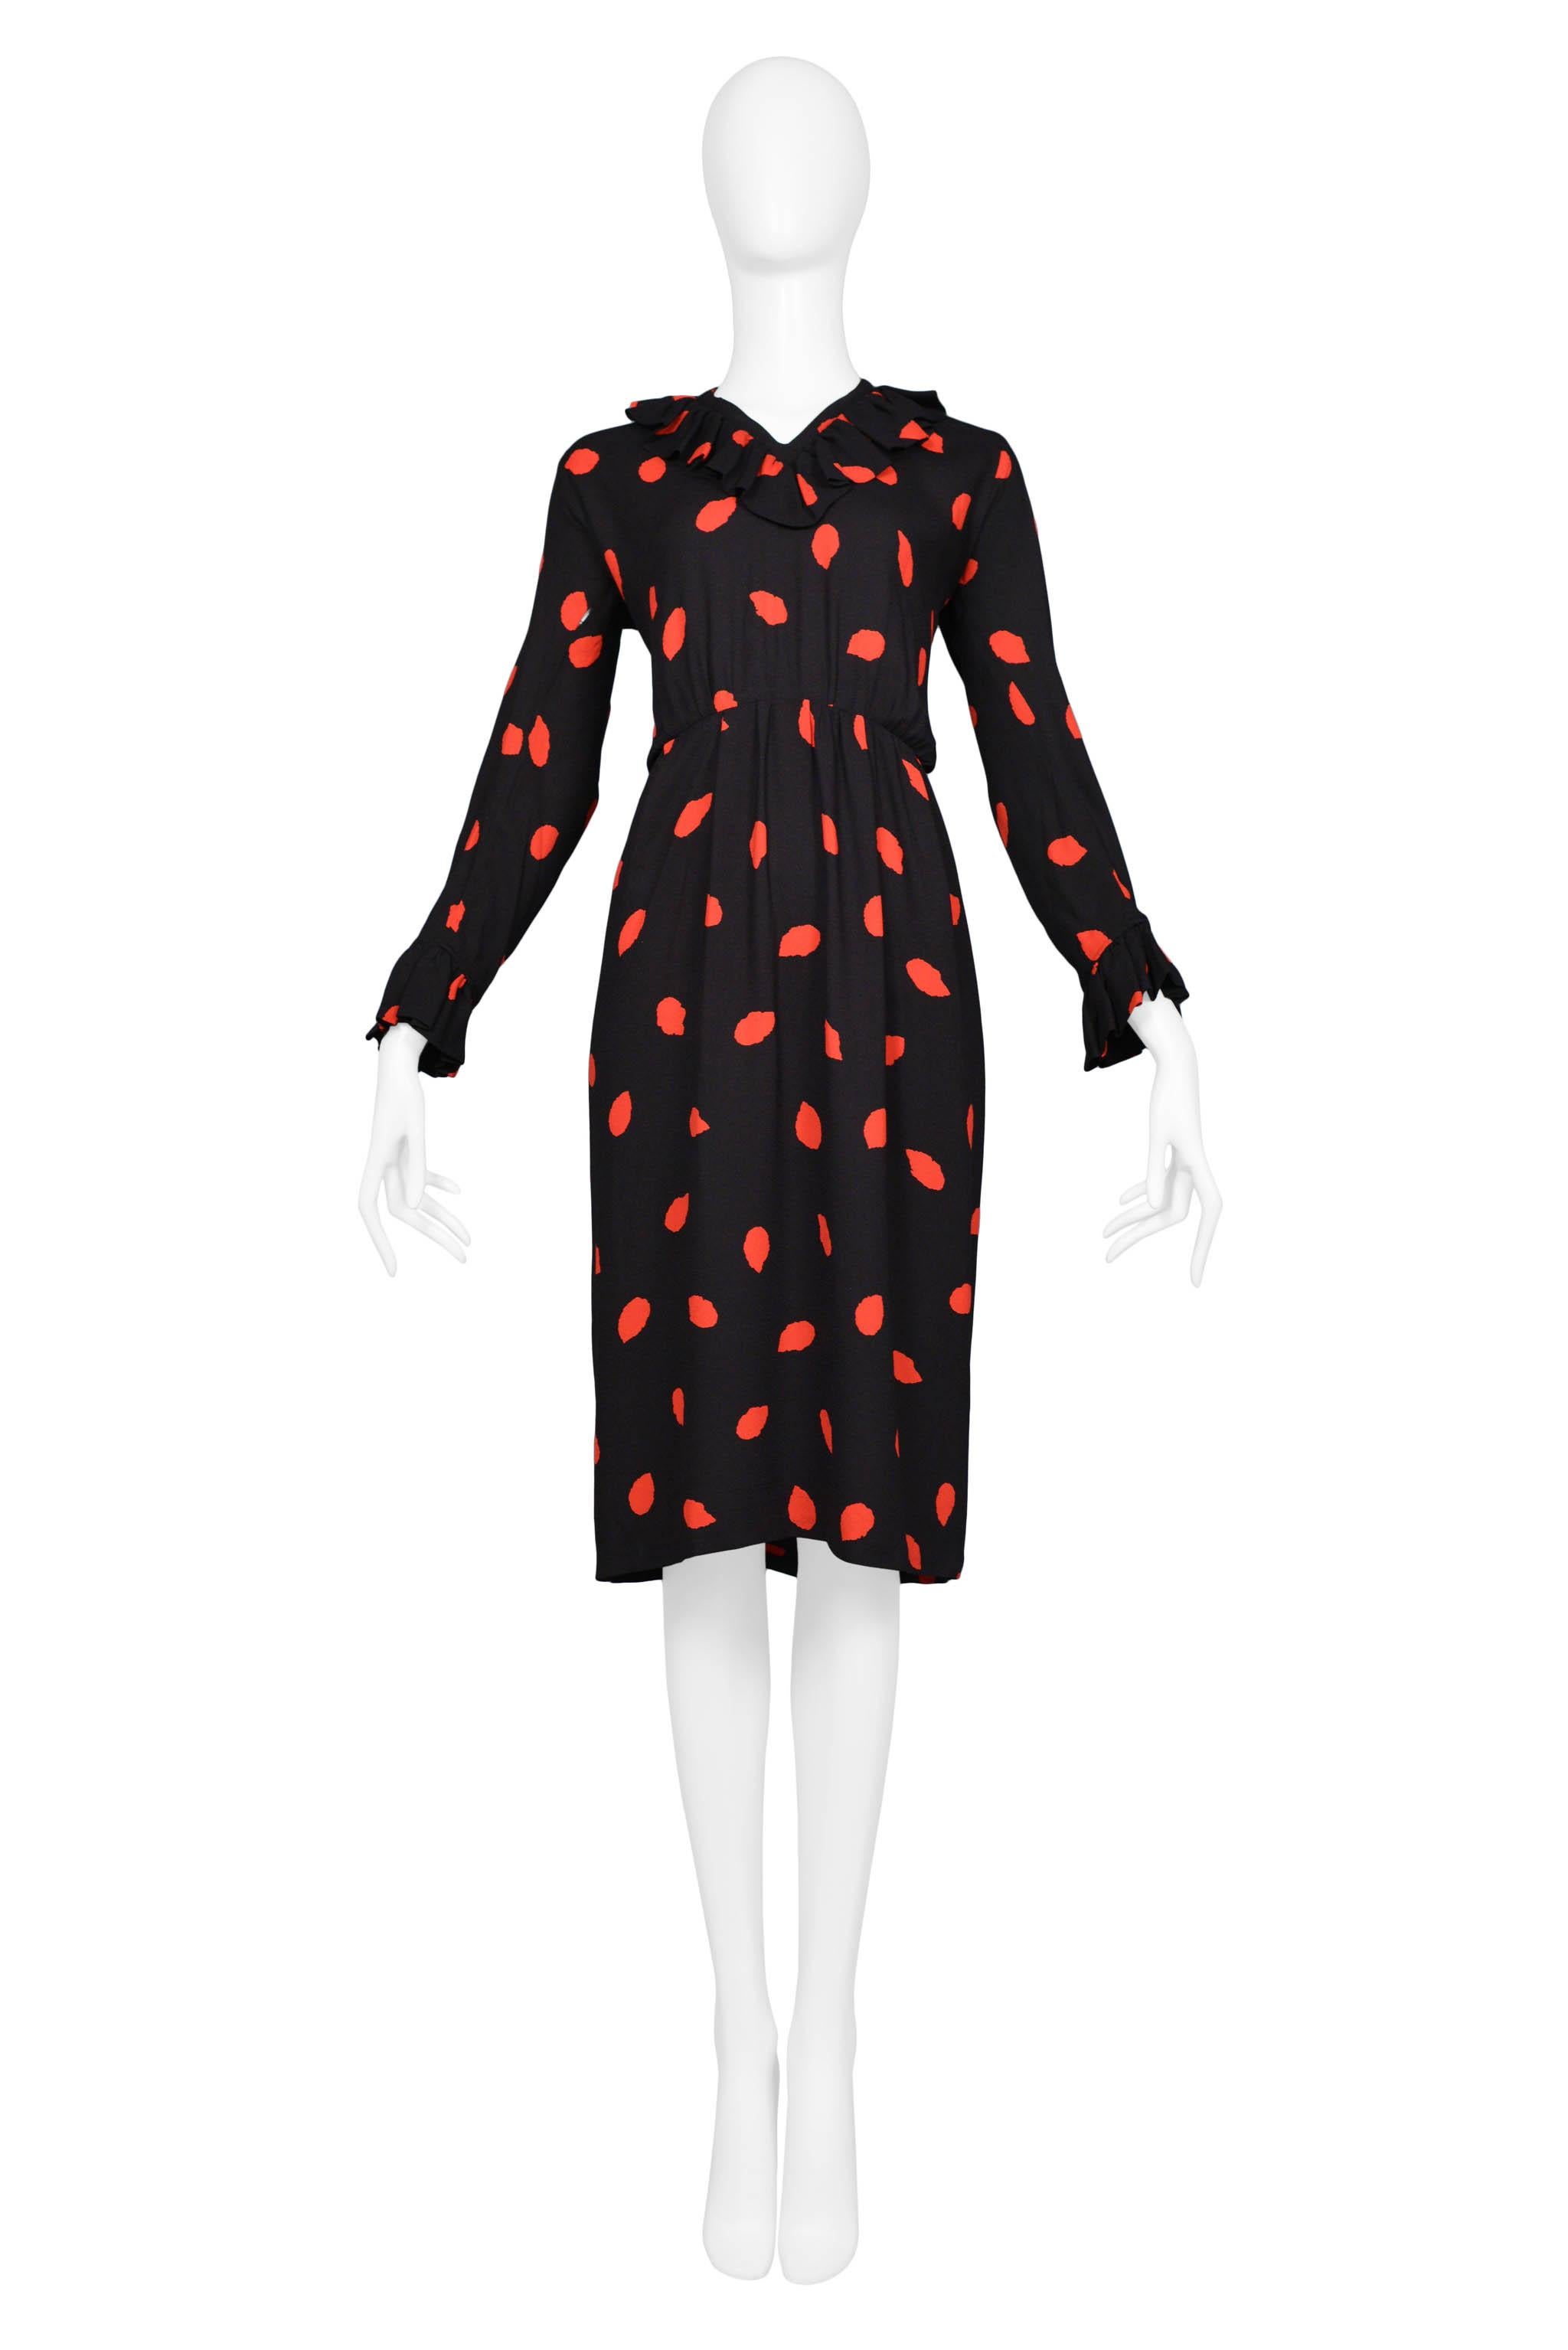 Resurrection Vintage is excited to offer a vintage Yves Saint Laurent black silk day dress with red print. Ruffles at collar and cuffs. High-waisted style with slight gathers. Circa 1970's.

Yves Saint Laurent
Size 42
Silk
Excellent Vintage